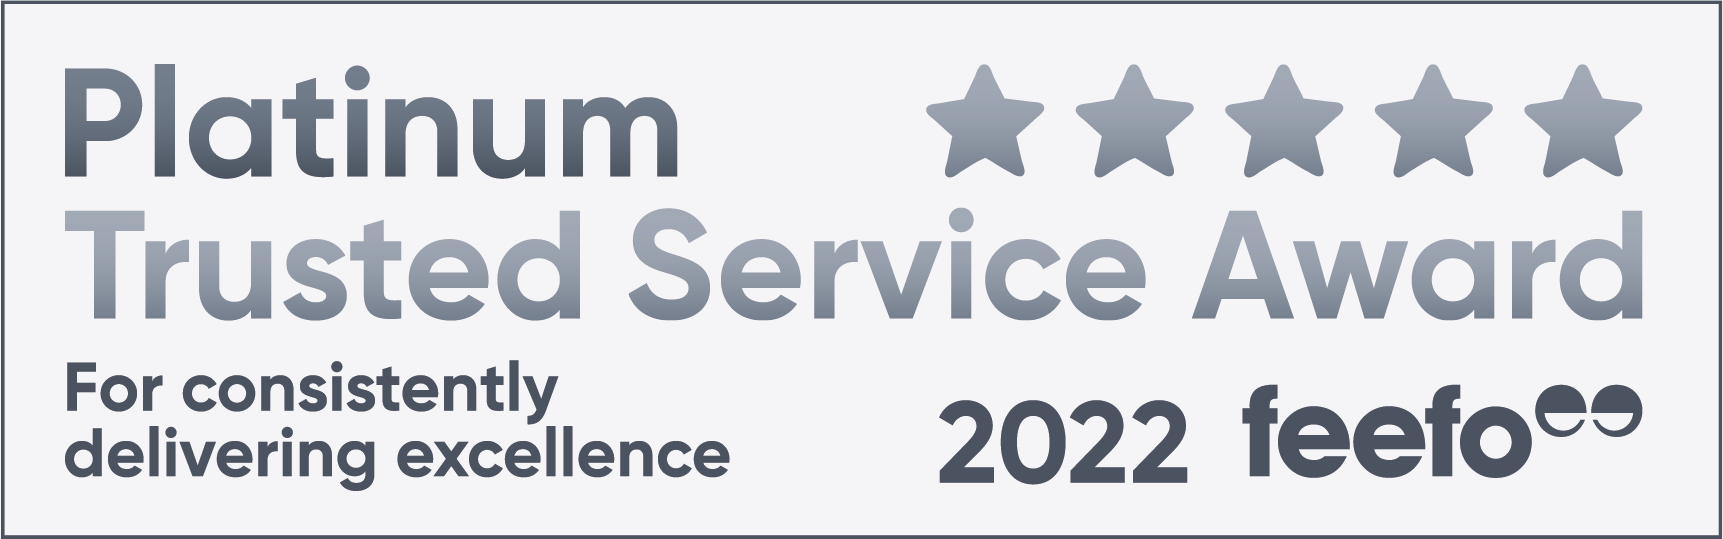 Platinum Trusted Service Award 2021 | For consistently delivering excellence